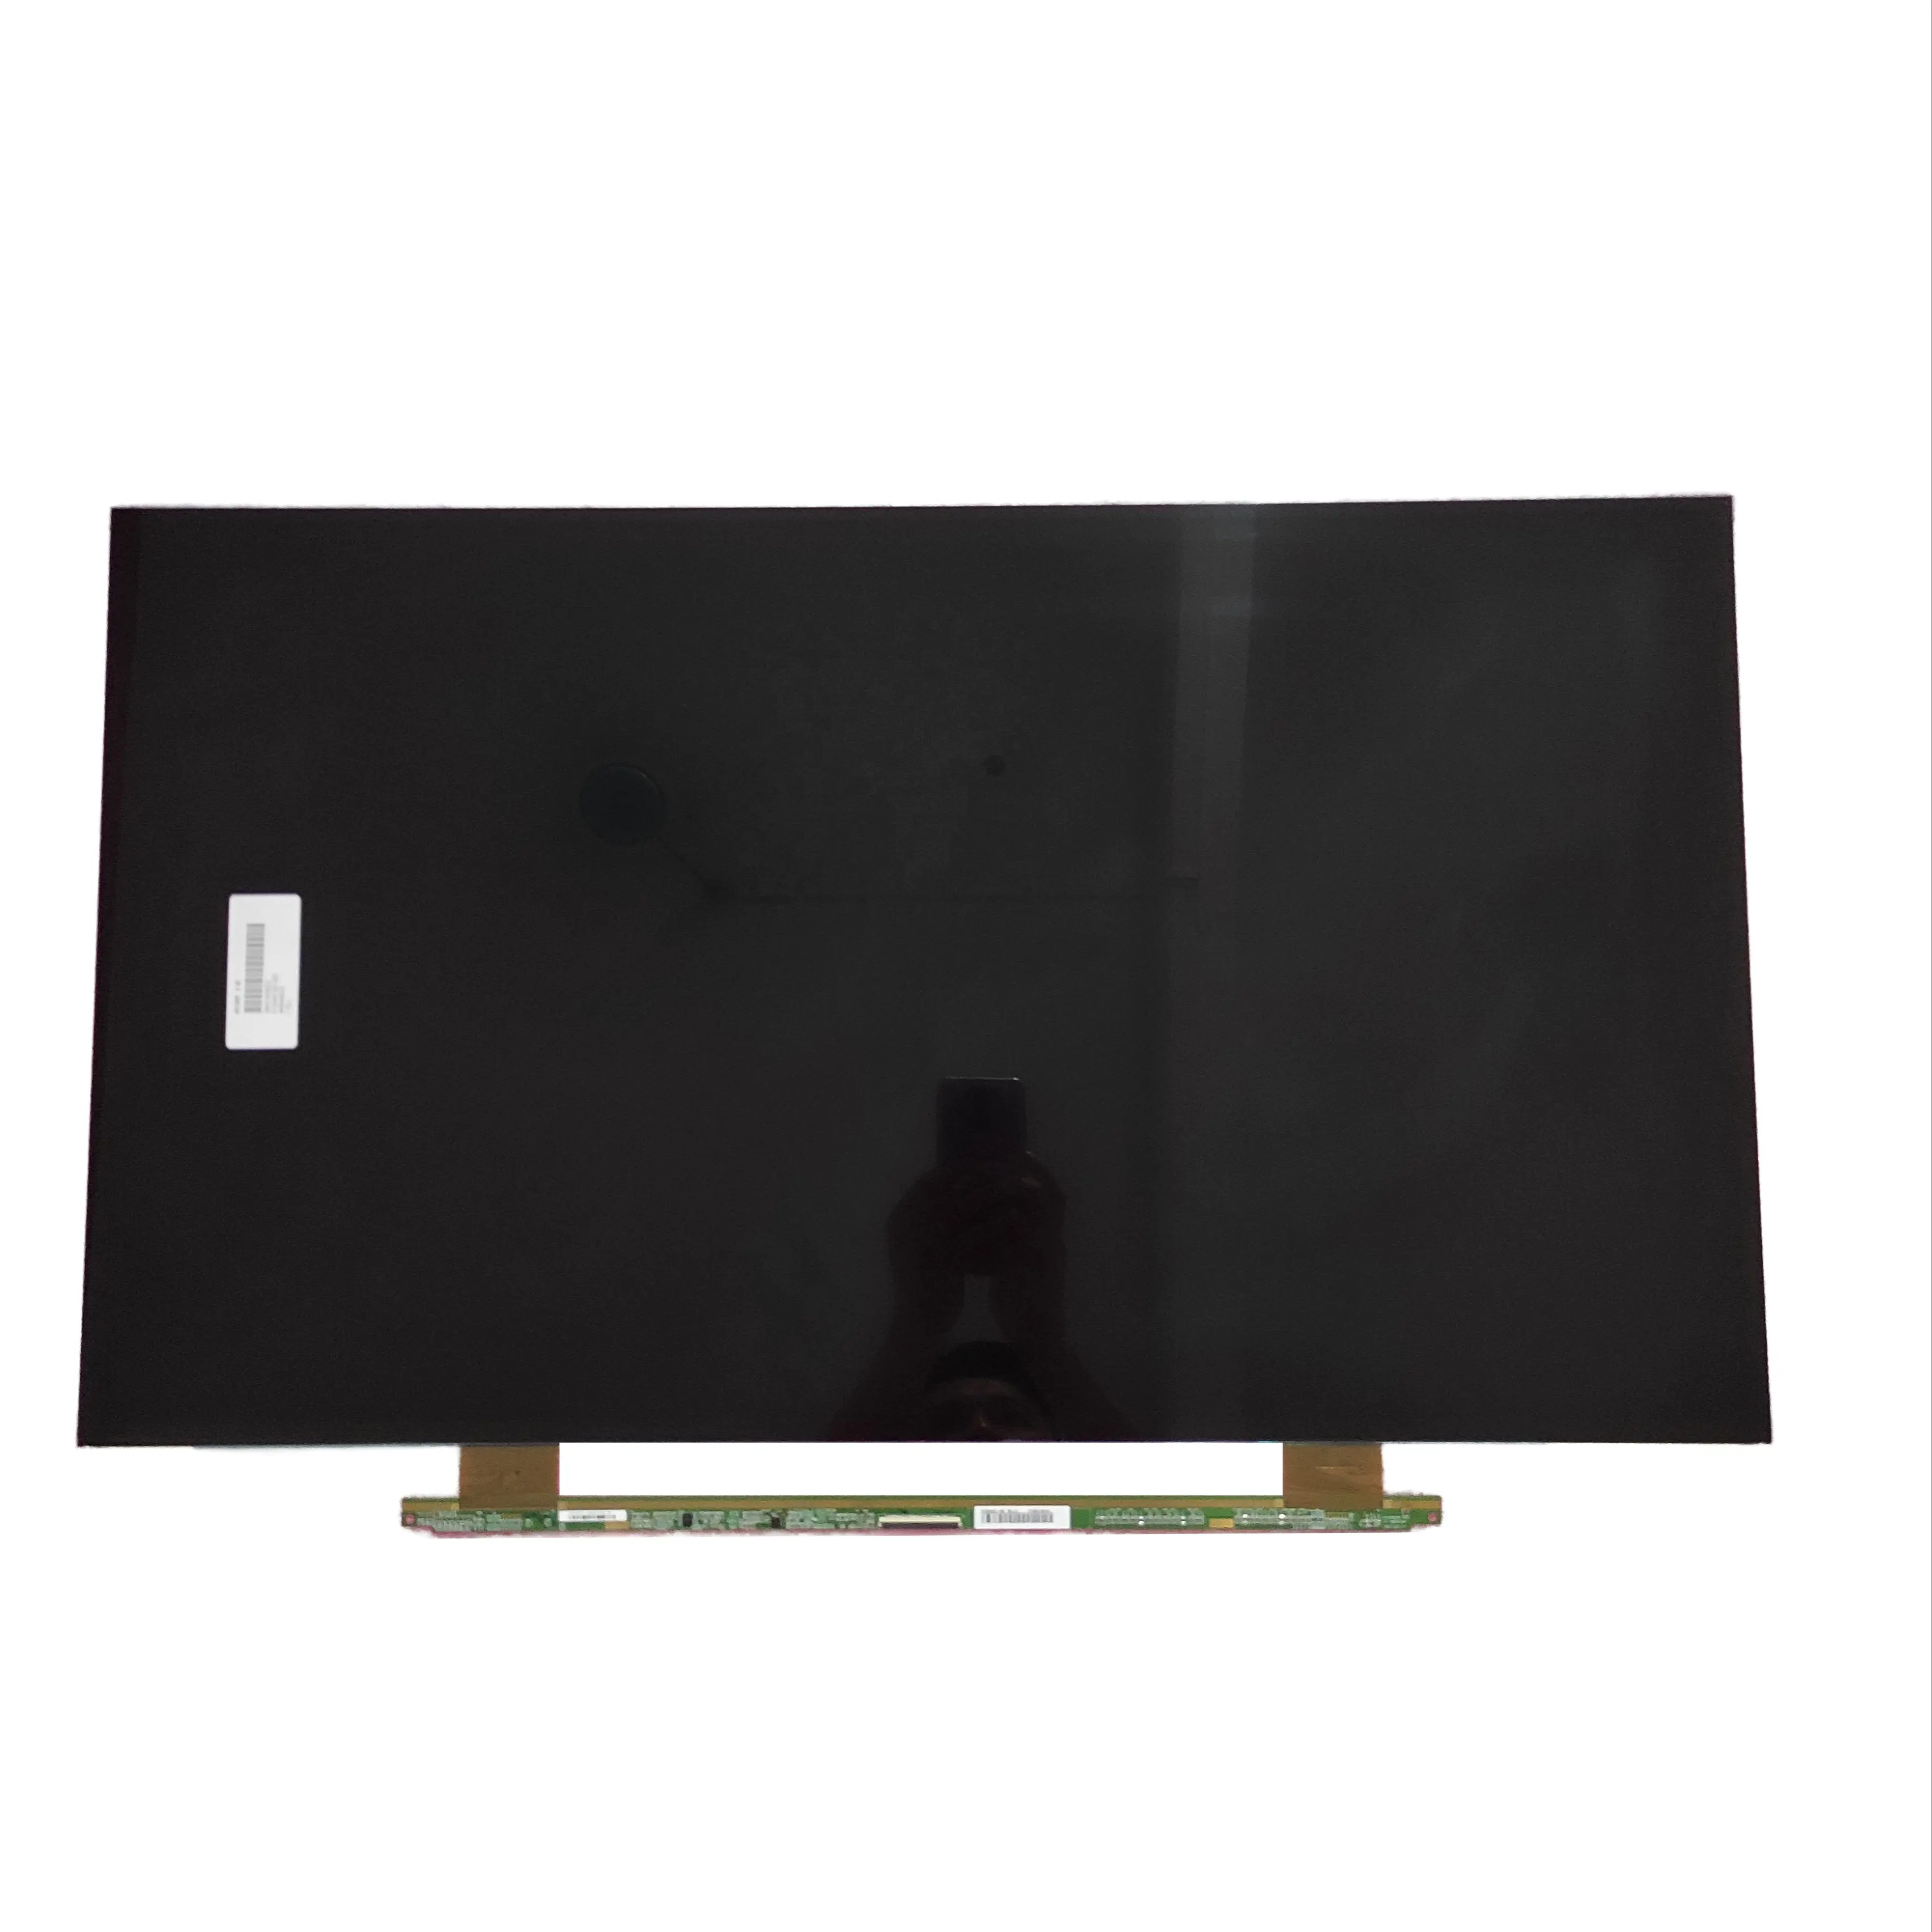 HV320WHB-N56 60 pins BOE 32" inch LCD LED TFT Display Open Cell TV Screen Spare Panel Replacement Parts for TV Repair